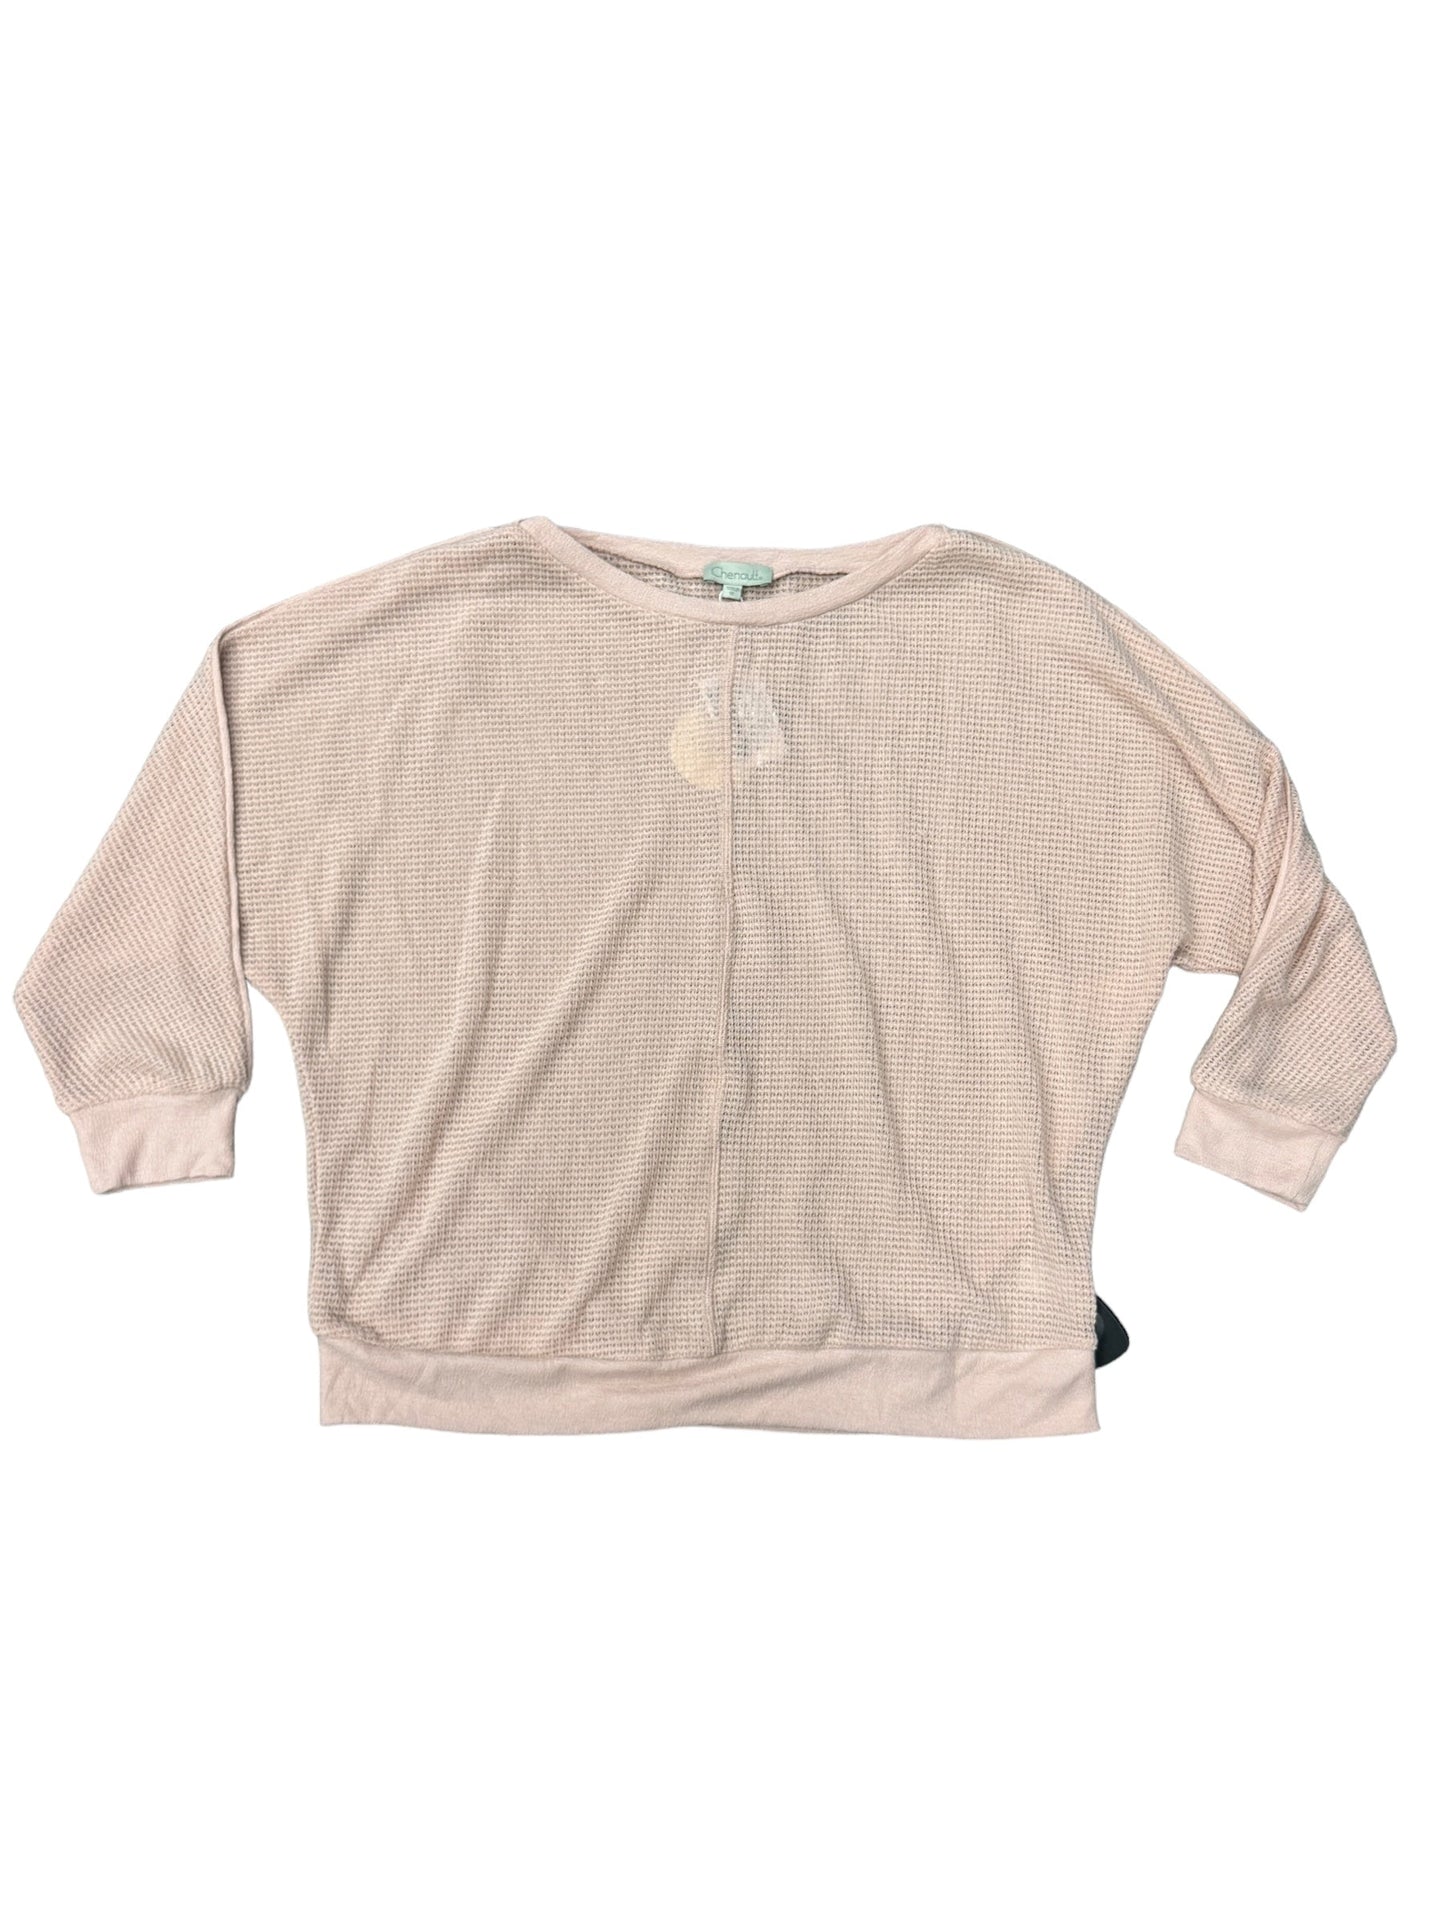 Top Long Sleeve By Chenault  Size: 1x